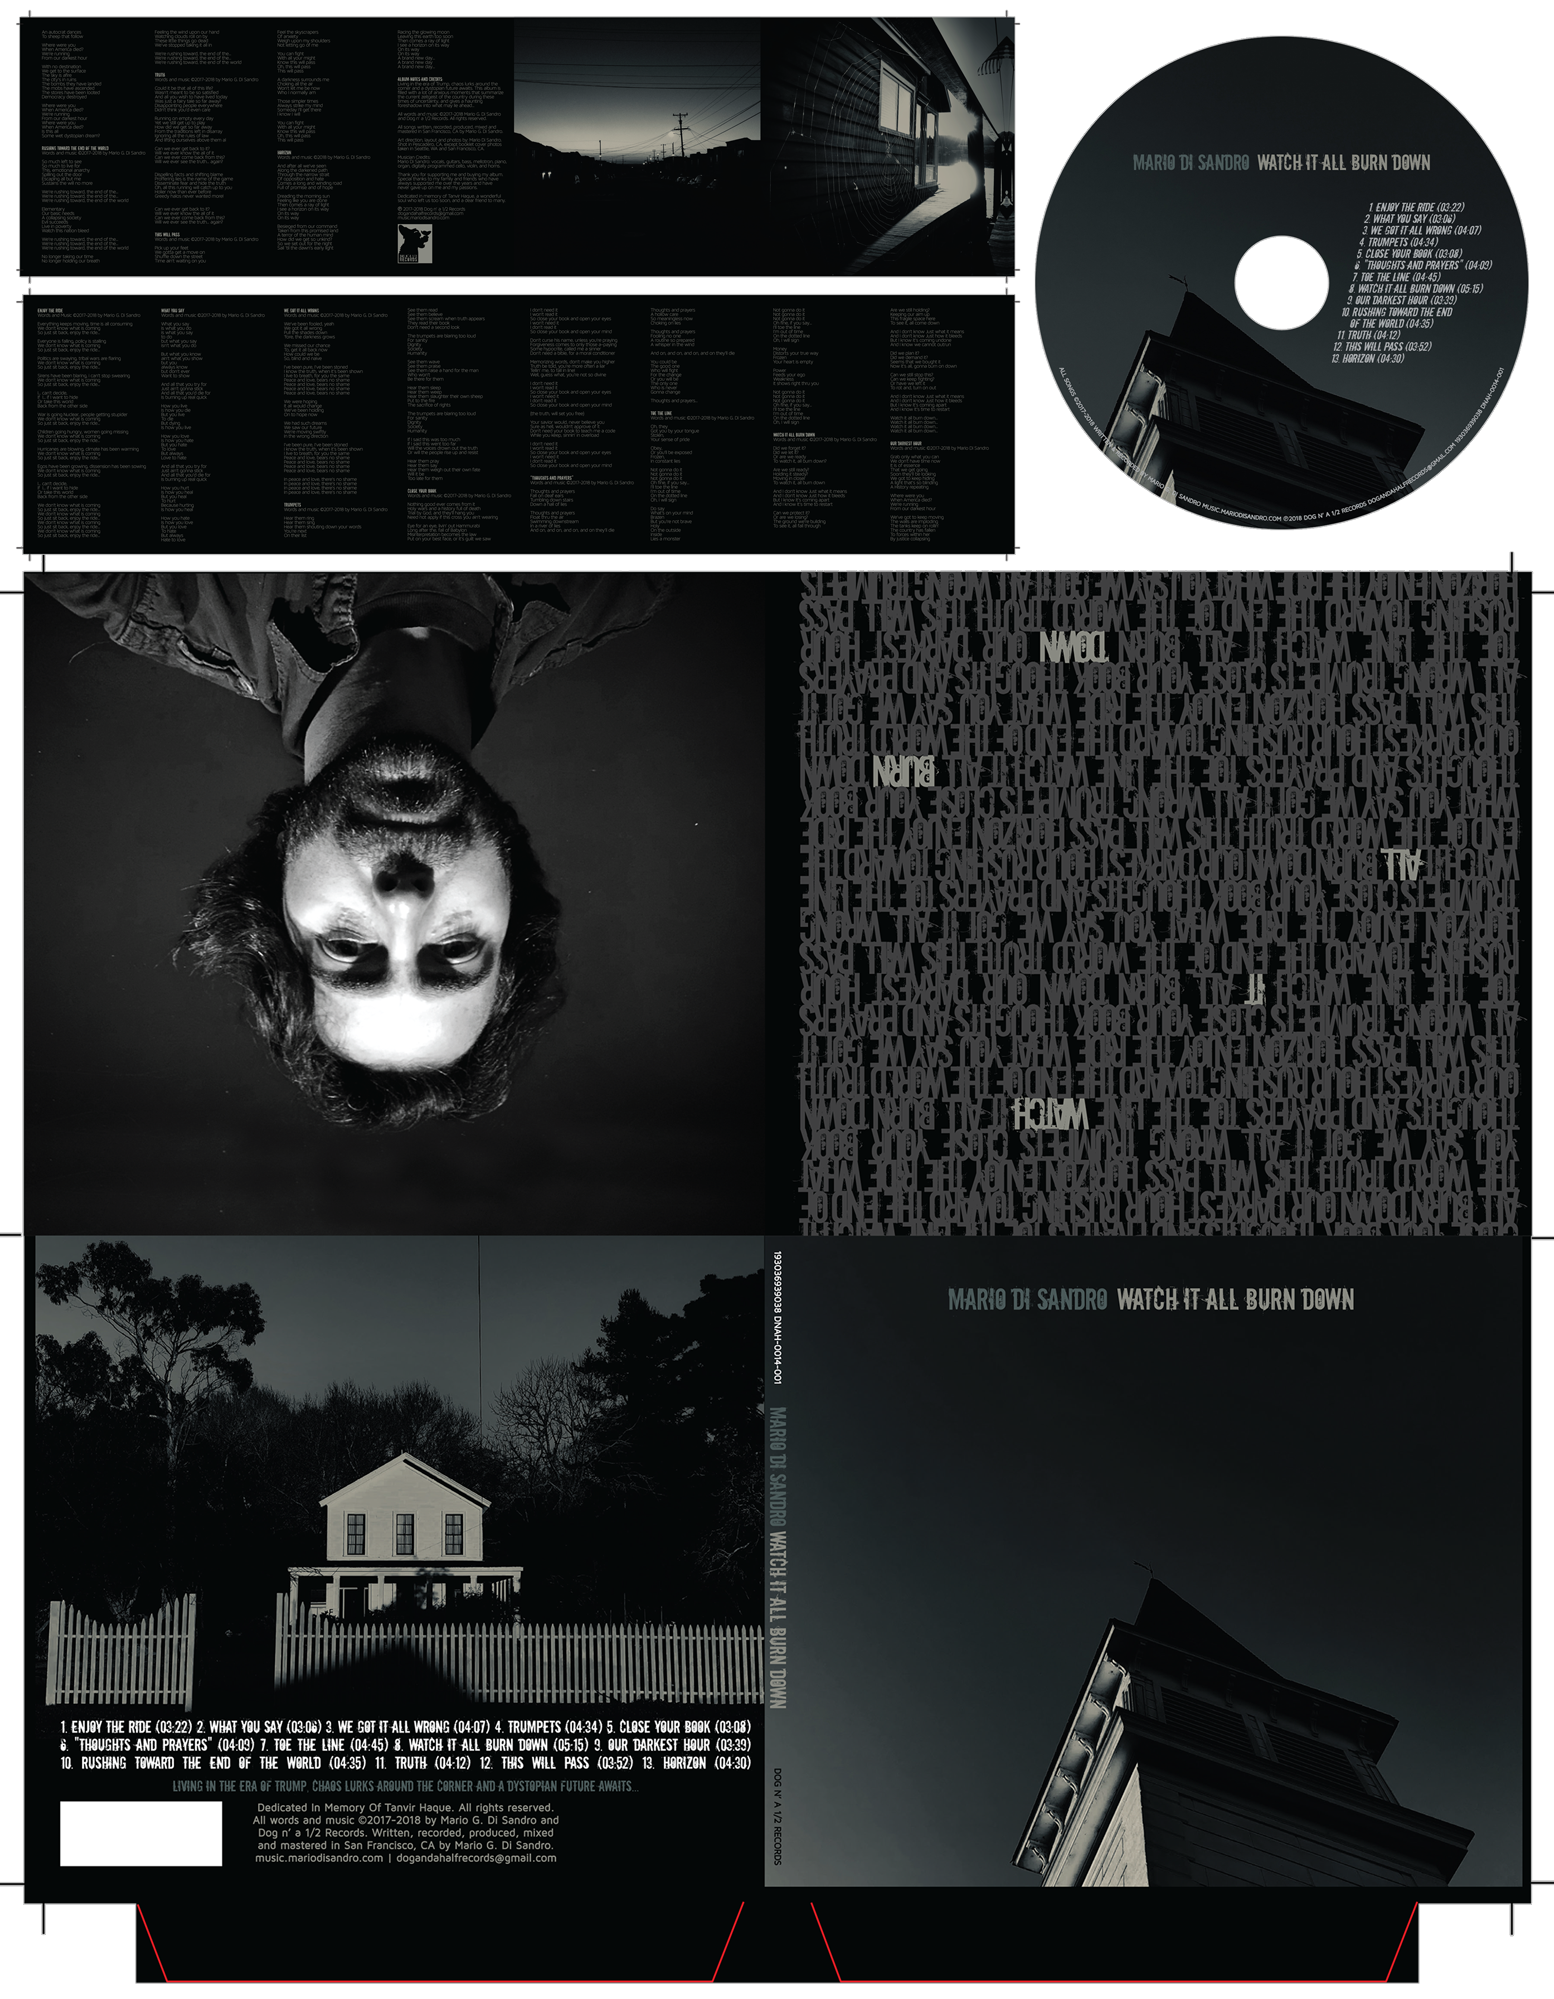 Client: Mario Di Sandro, touring musician. Description: Designed the album artwork and layout, booklet and disk label for my own CD release and shot all the photography for it, sent to printers and mass produced.